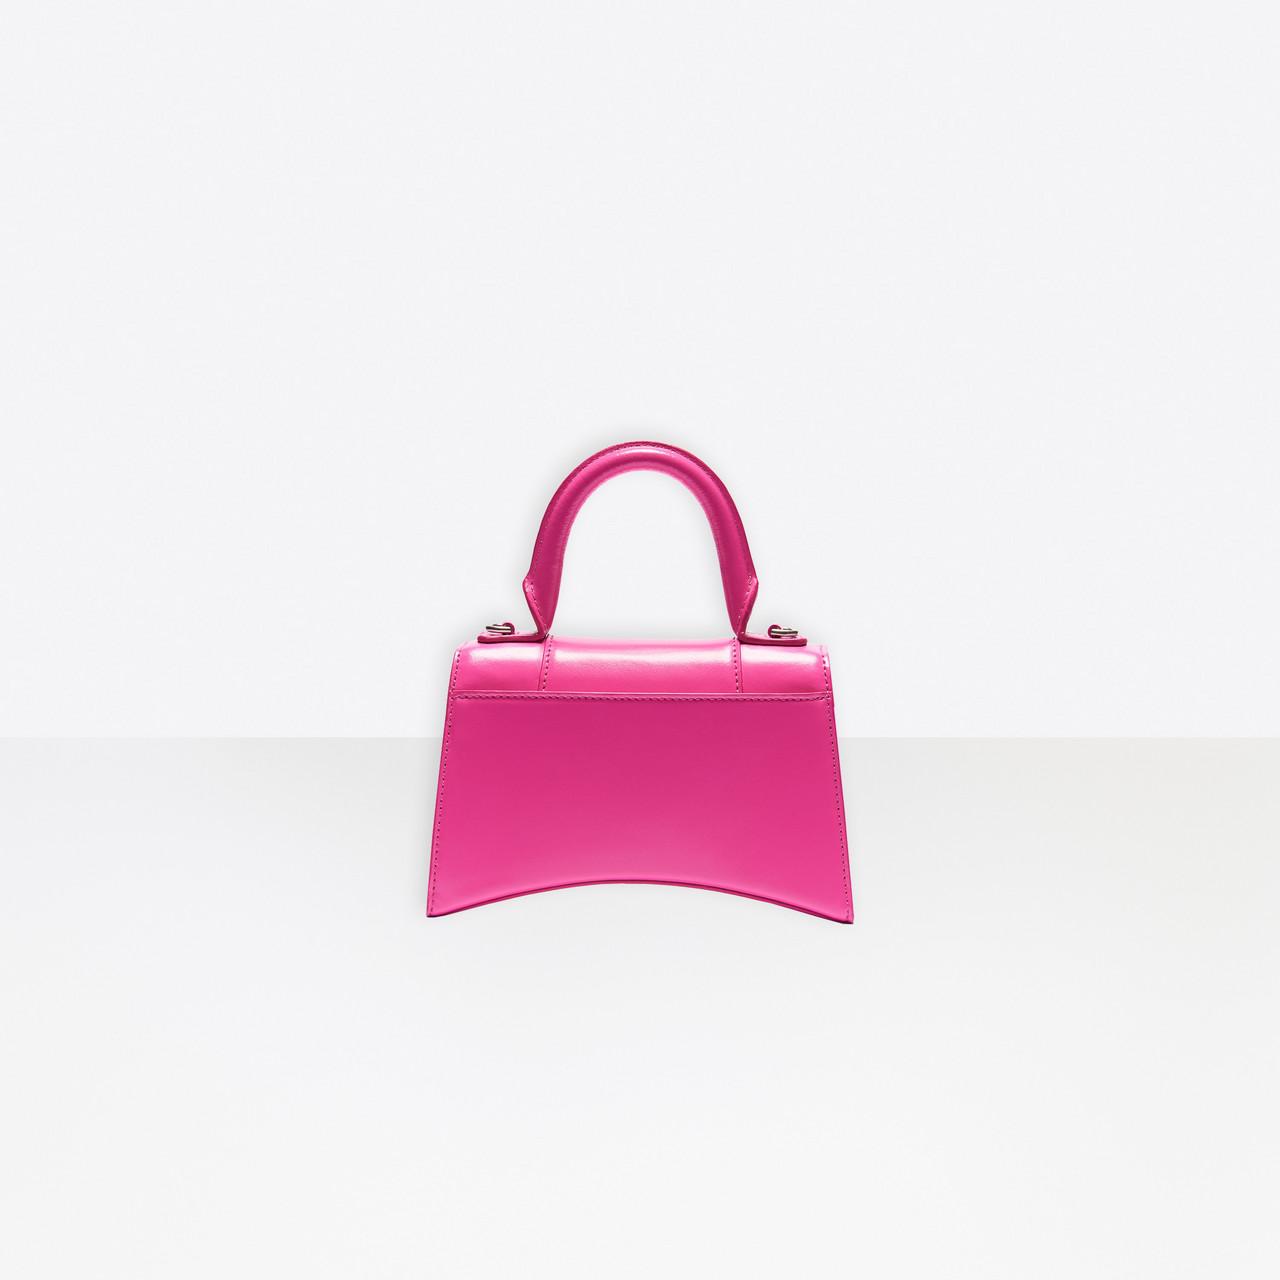 Balenciaga Hourglass Small Top Handle Bag in Pink | Lyst UK